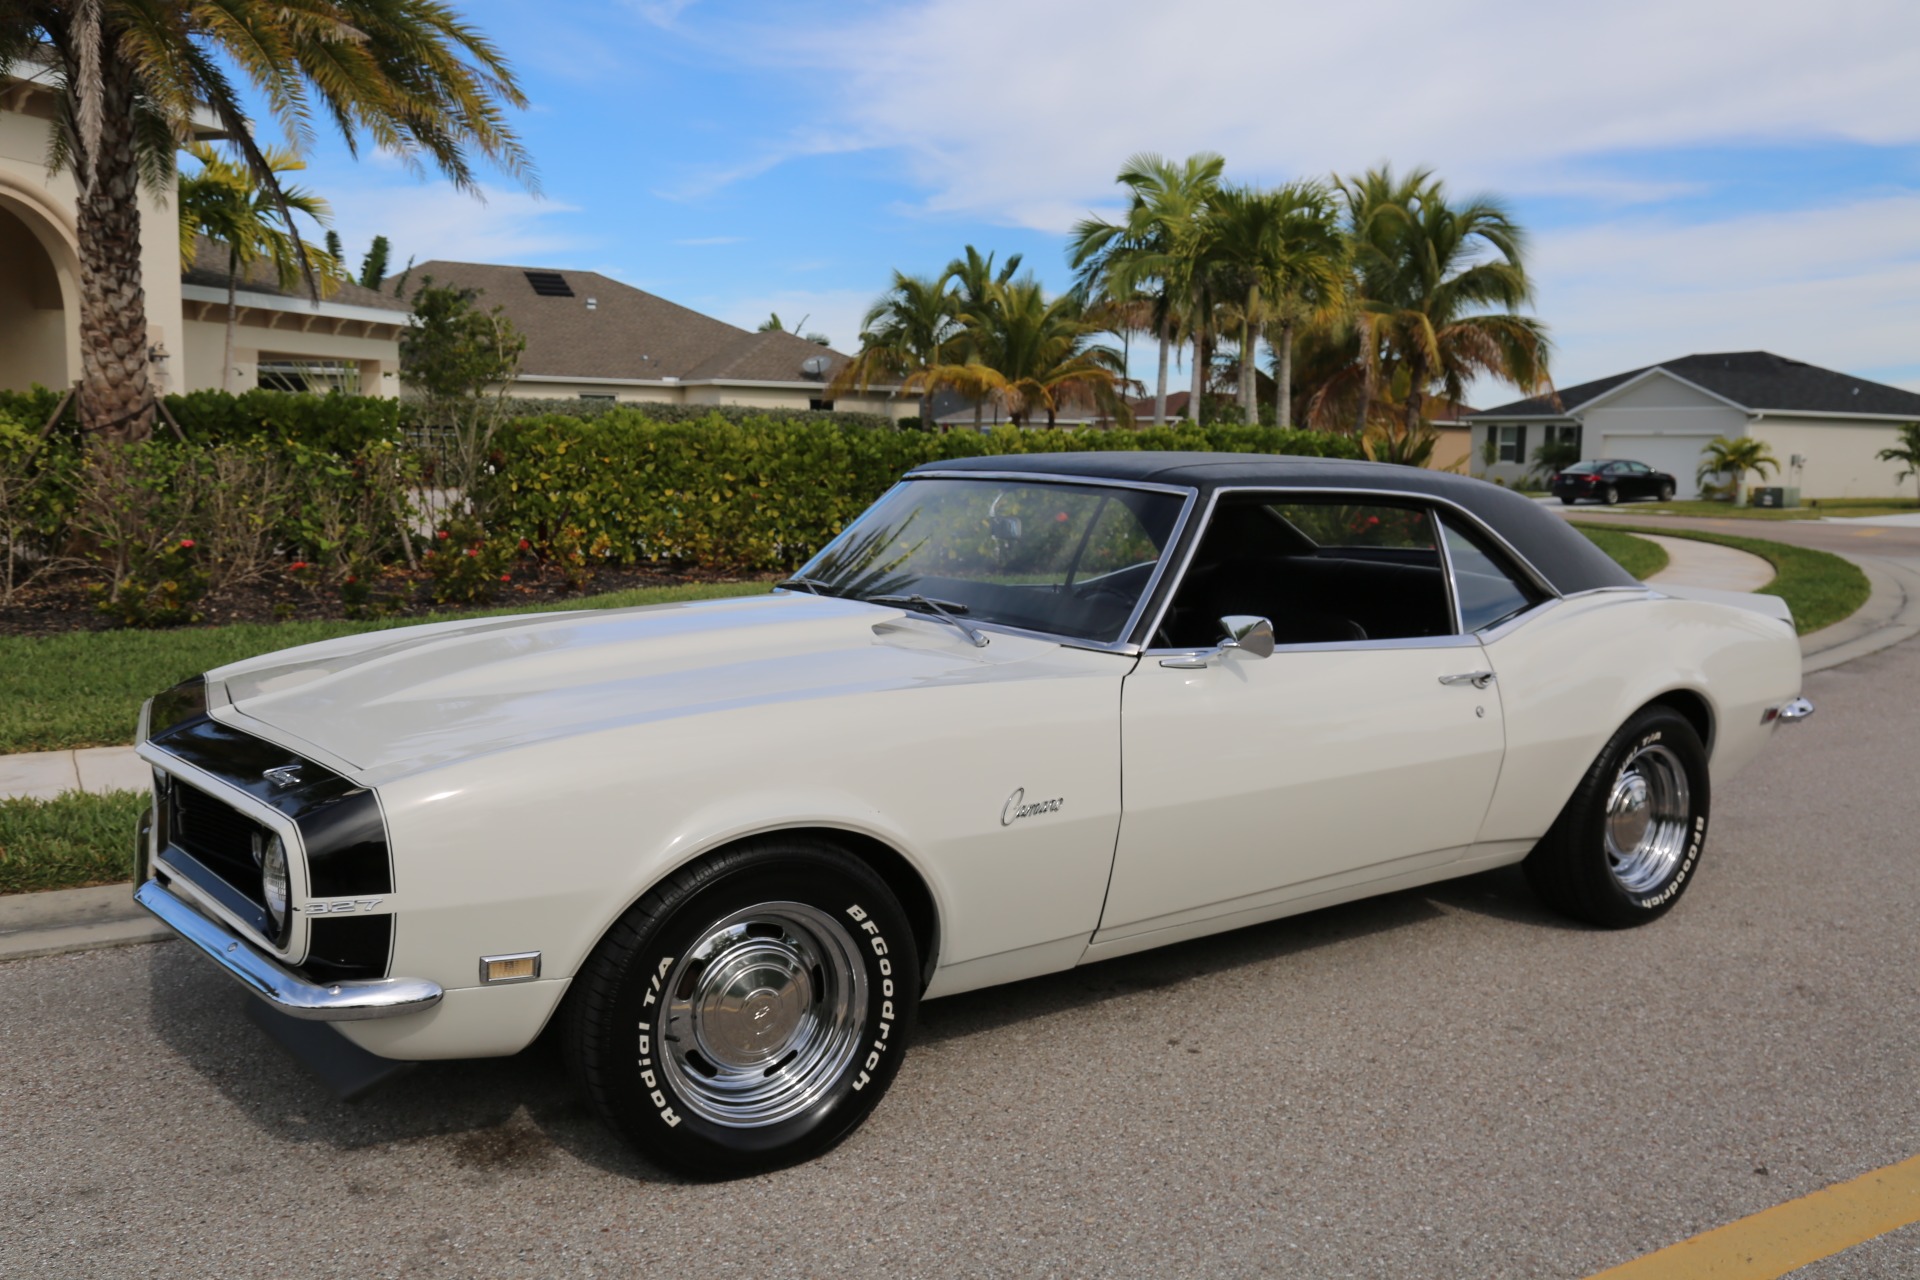 Used 1968 Chevy Camaro 327 V8 Auto # Match for sale Sold at Muscle Cars for Sale Inc. in Fort Myers FL 33912 2